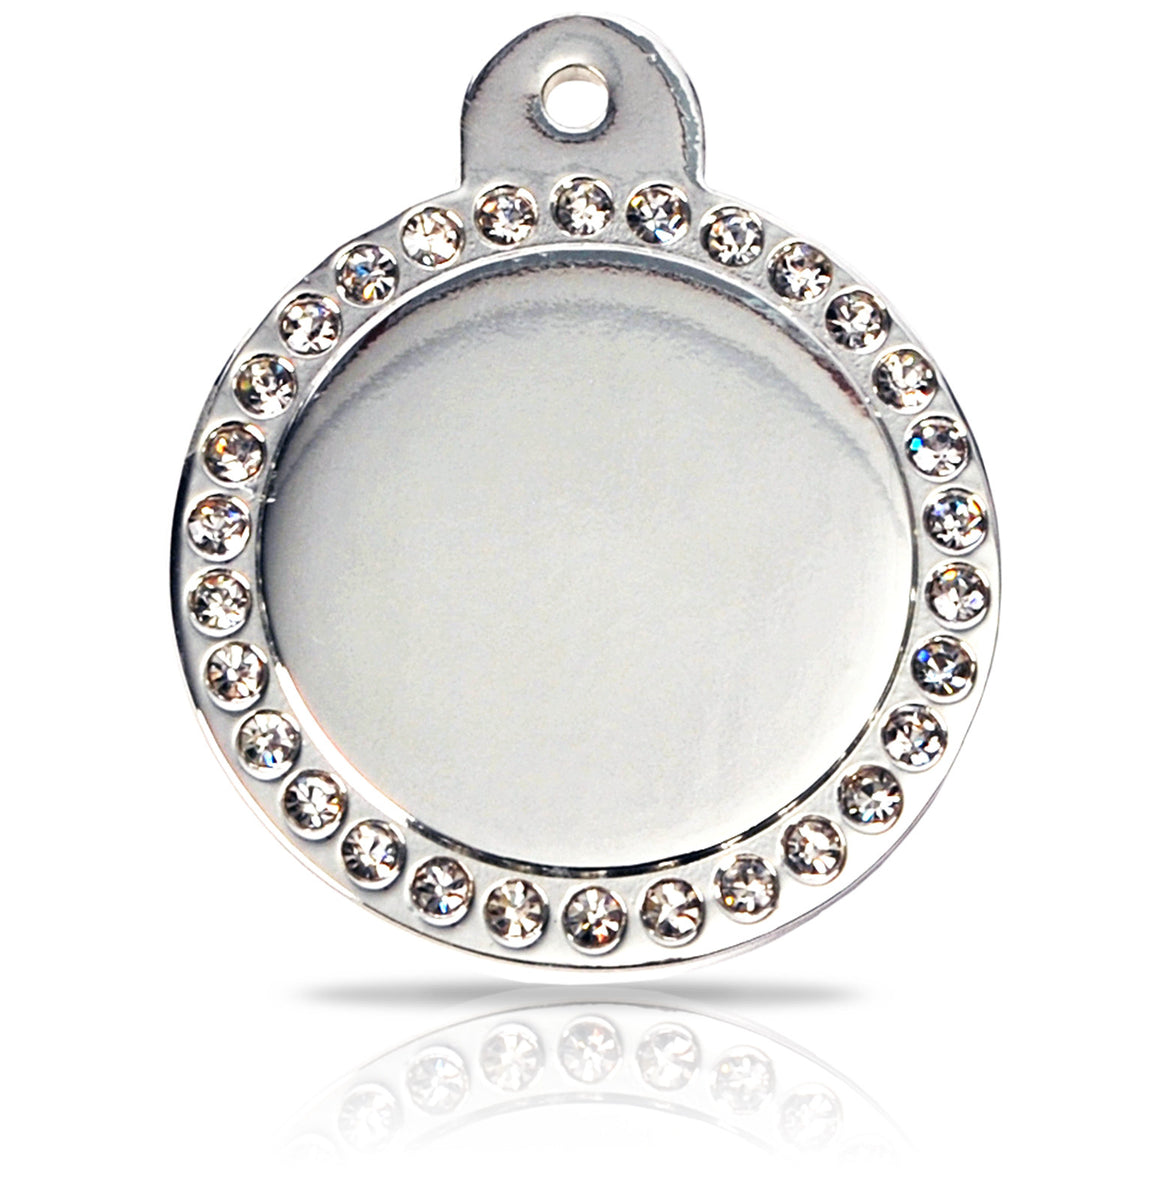 TaggIT Glamour Large Disc Silver Diamond iMarc Pet Tag